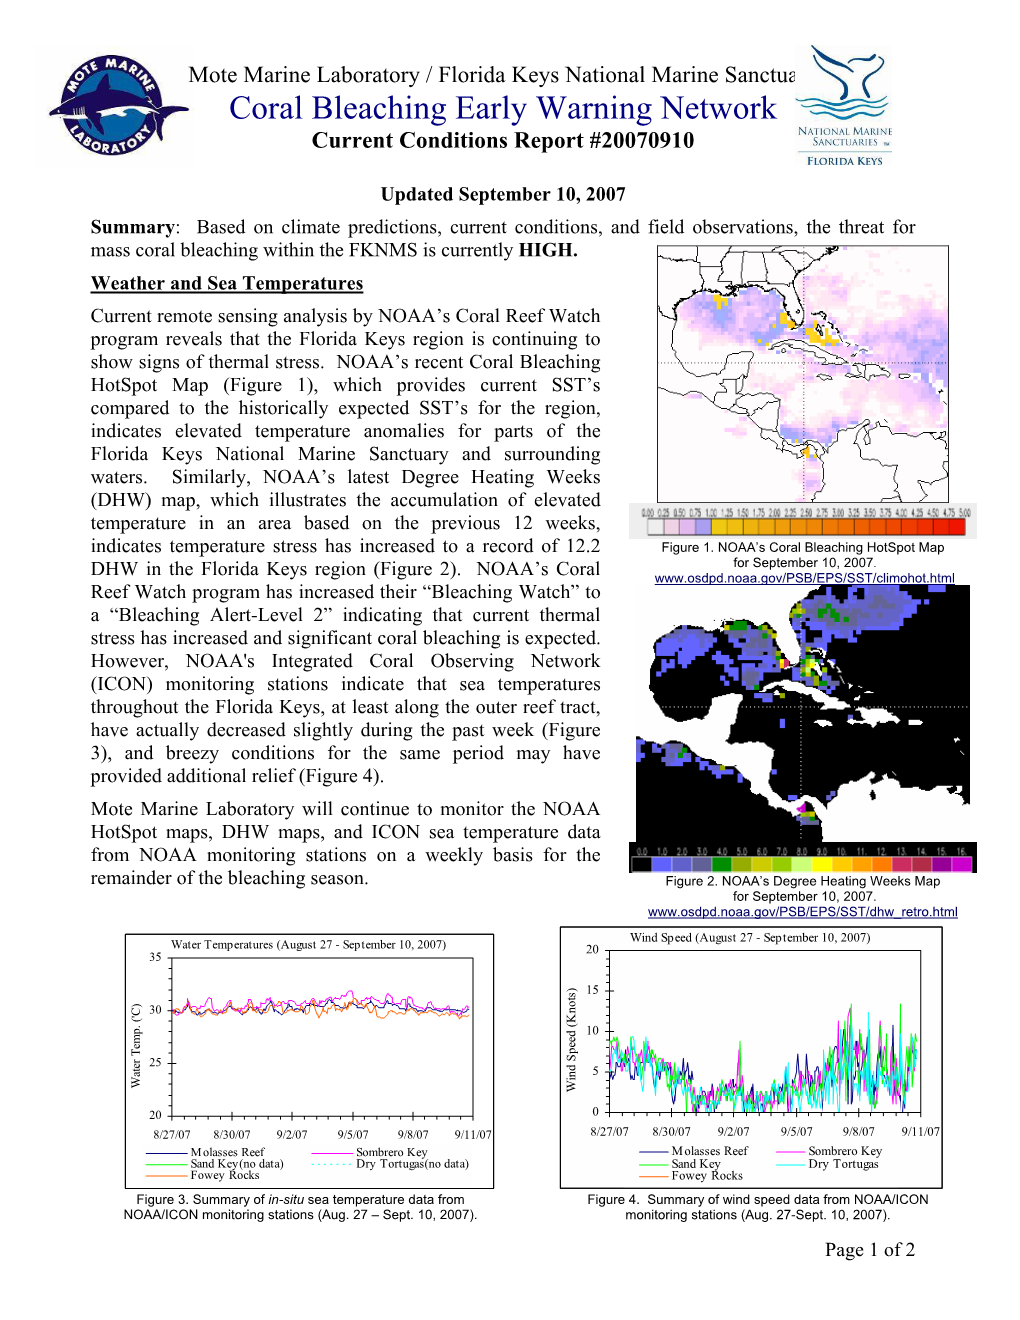 Coral Bleaching Early Warning Network Current Conditions Report #20070910